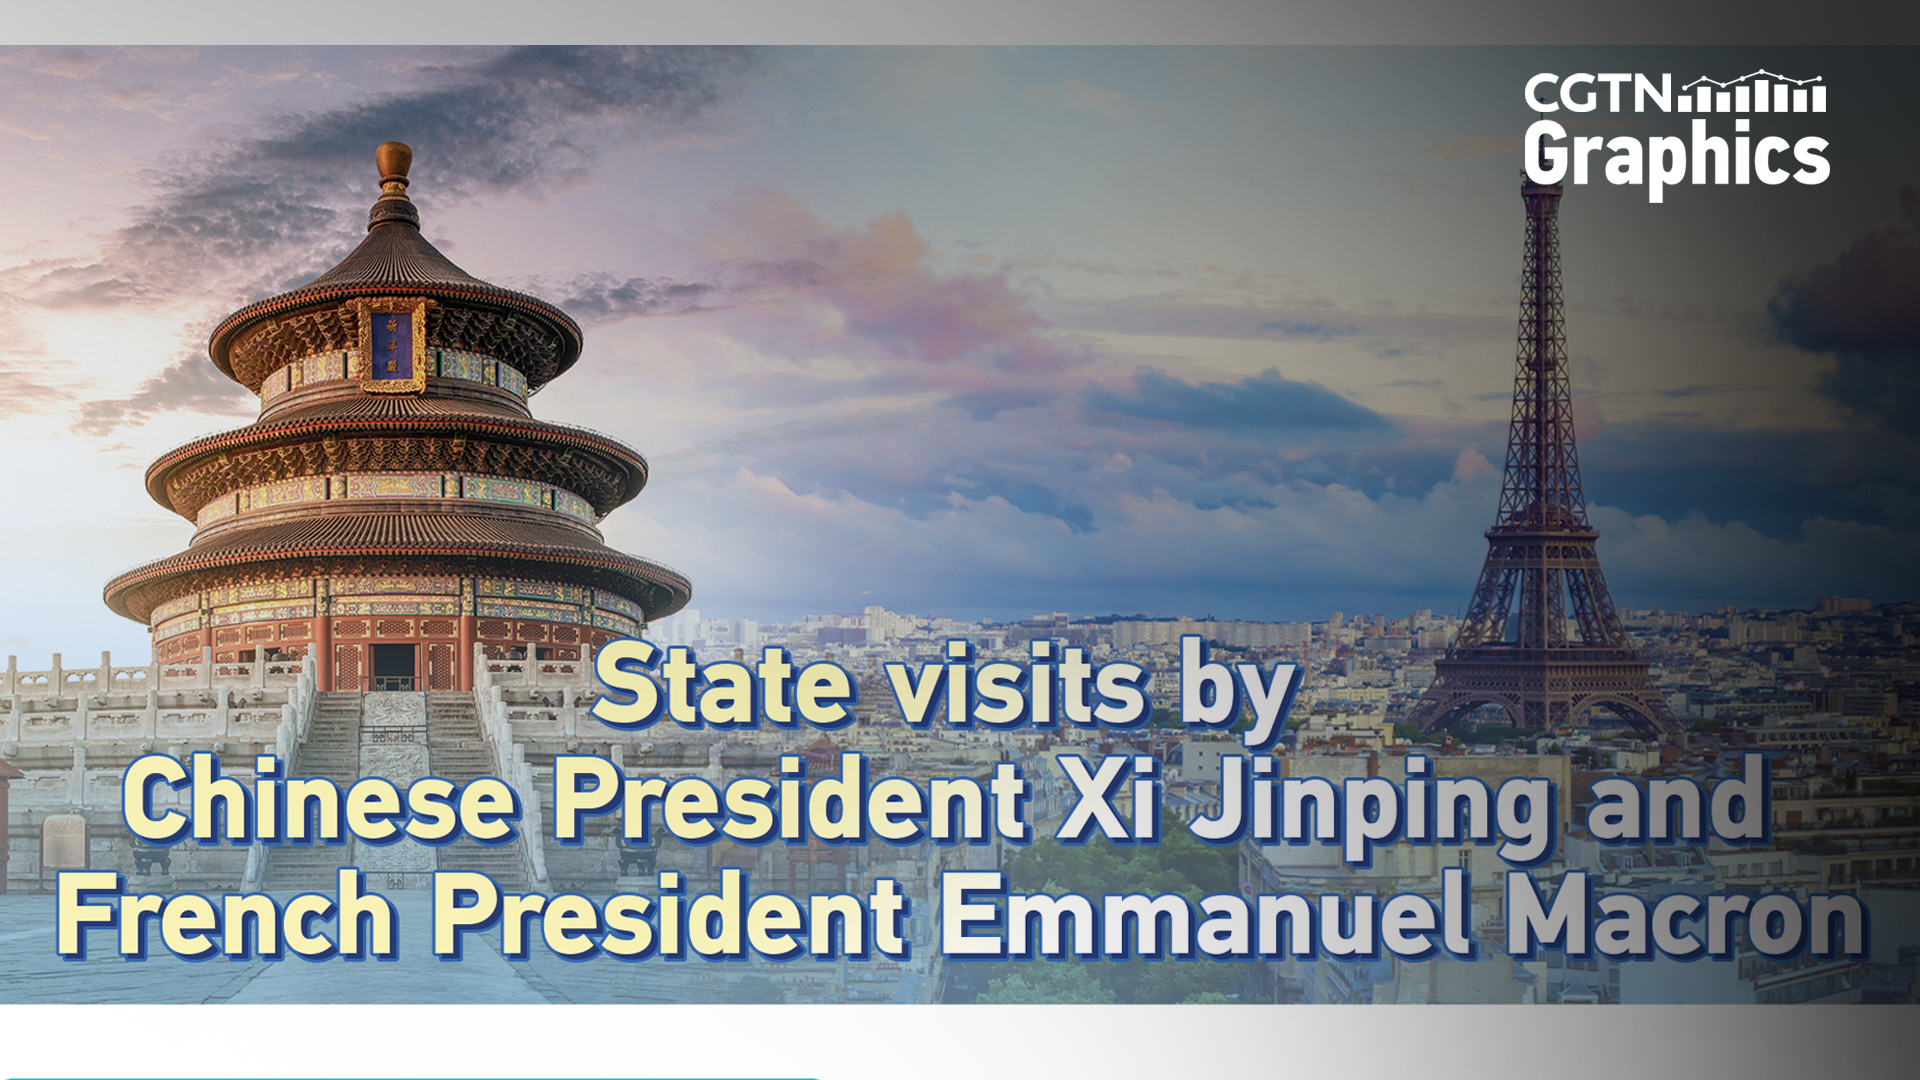 Graphics: Timeline of state visits by Chinese and French presidents